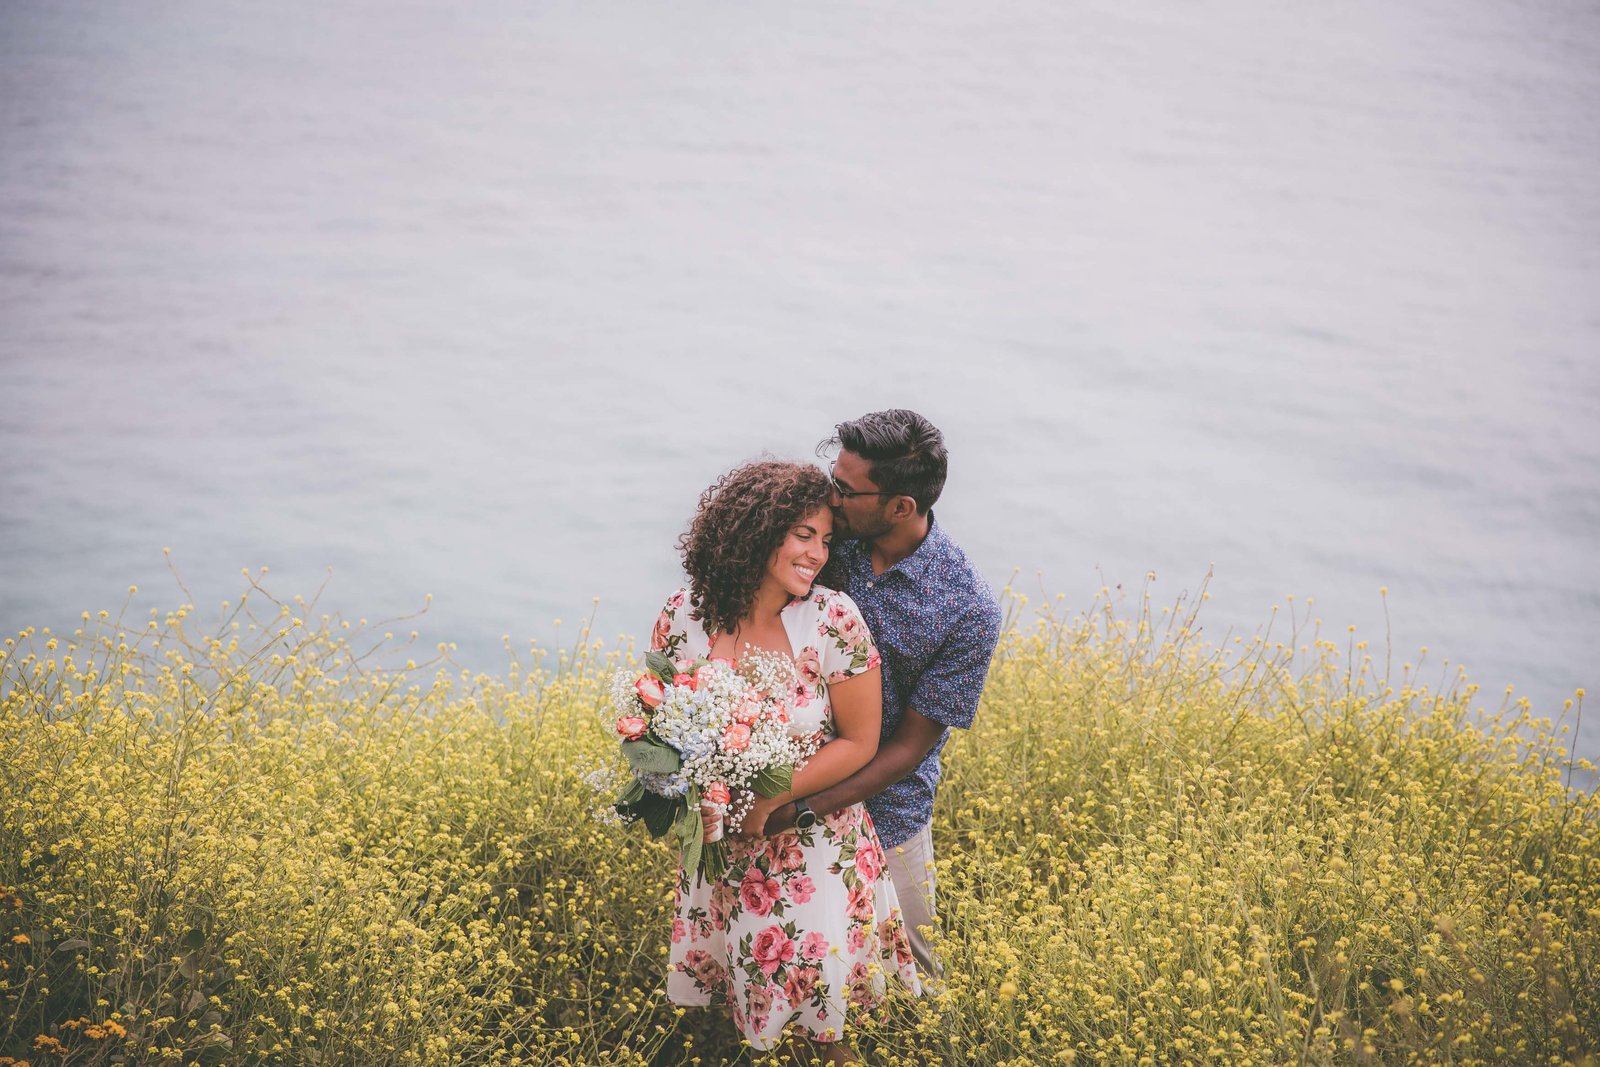 Couple goes in prom pose among yellow wildflowers in Big Sur.